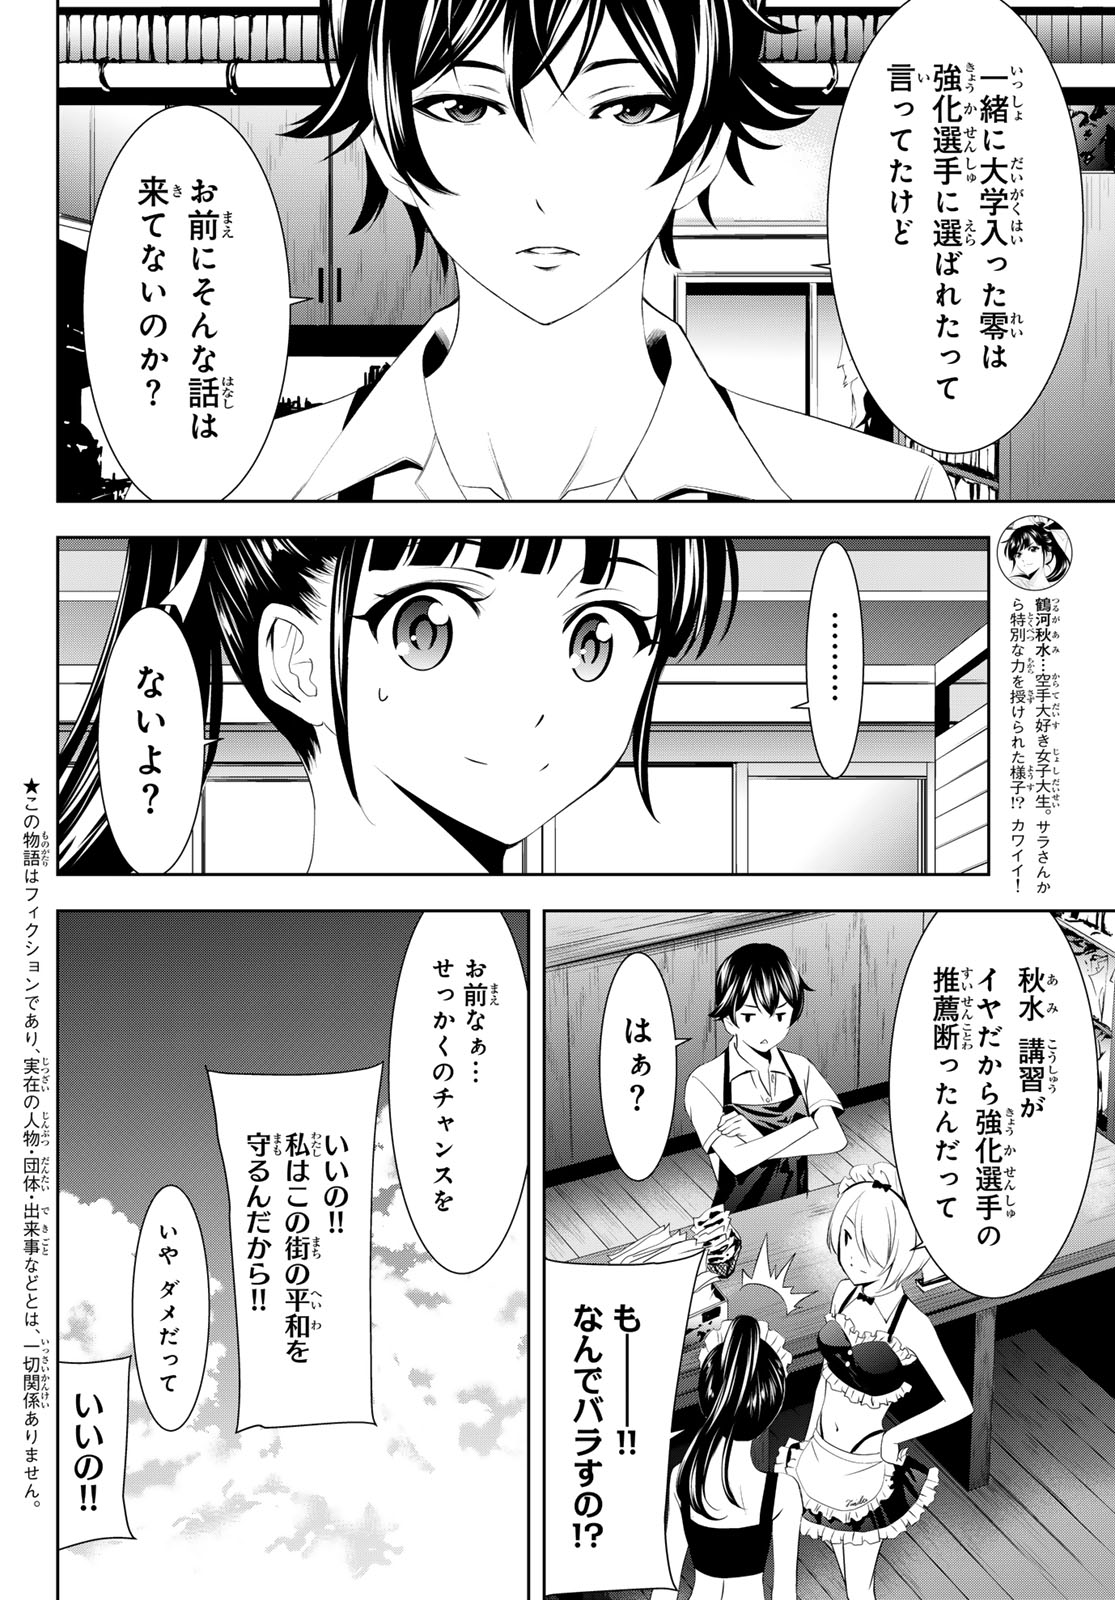 Megami no Cafe Terace - Chapter 150 - Page 2